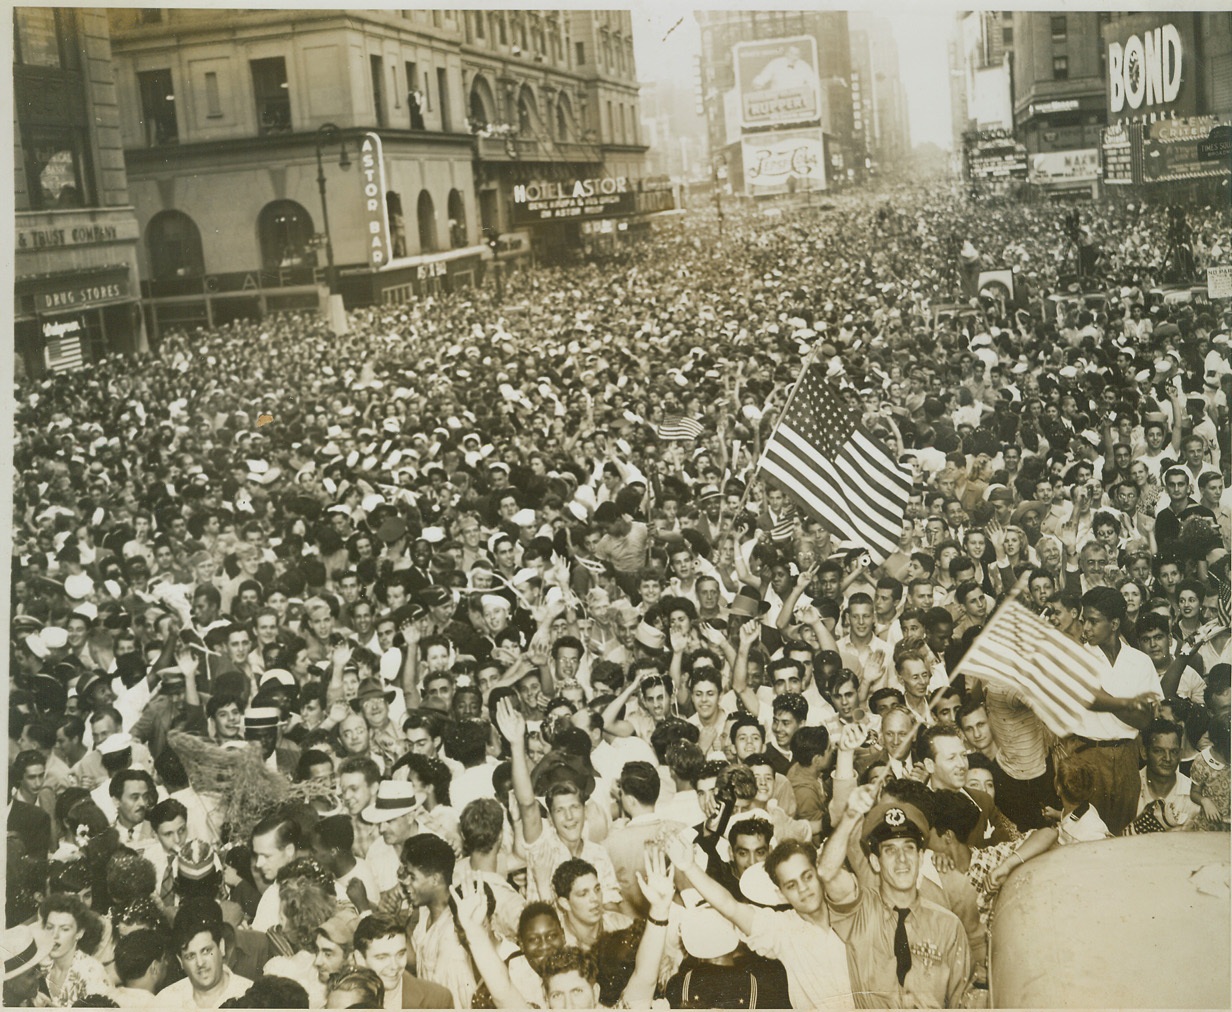 Once in a Lifetime!, 8/14/1945. NEW YORK, N.Y. -- When hours of waiting were ended by the announcement that the war with Japan was over, crowds jammed Times Square from side to side and from 42nd Street to 50th Street. Here, the photographer pictures the largest crowd that ever jammed the famous square. Photo was taken looking North from 42nd Street. Credit: (ACME);